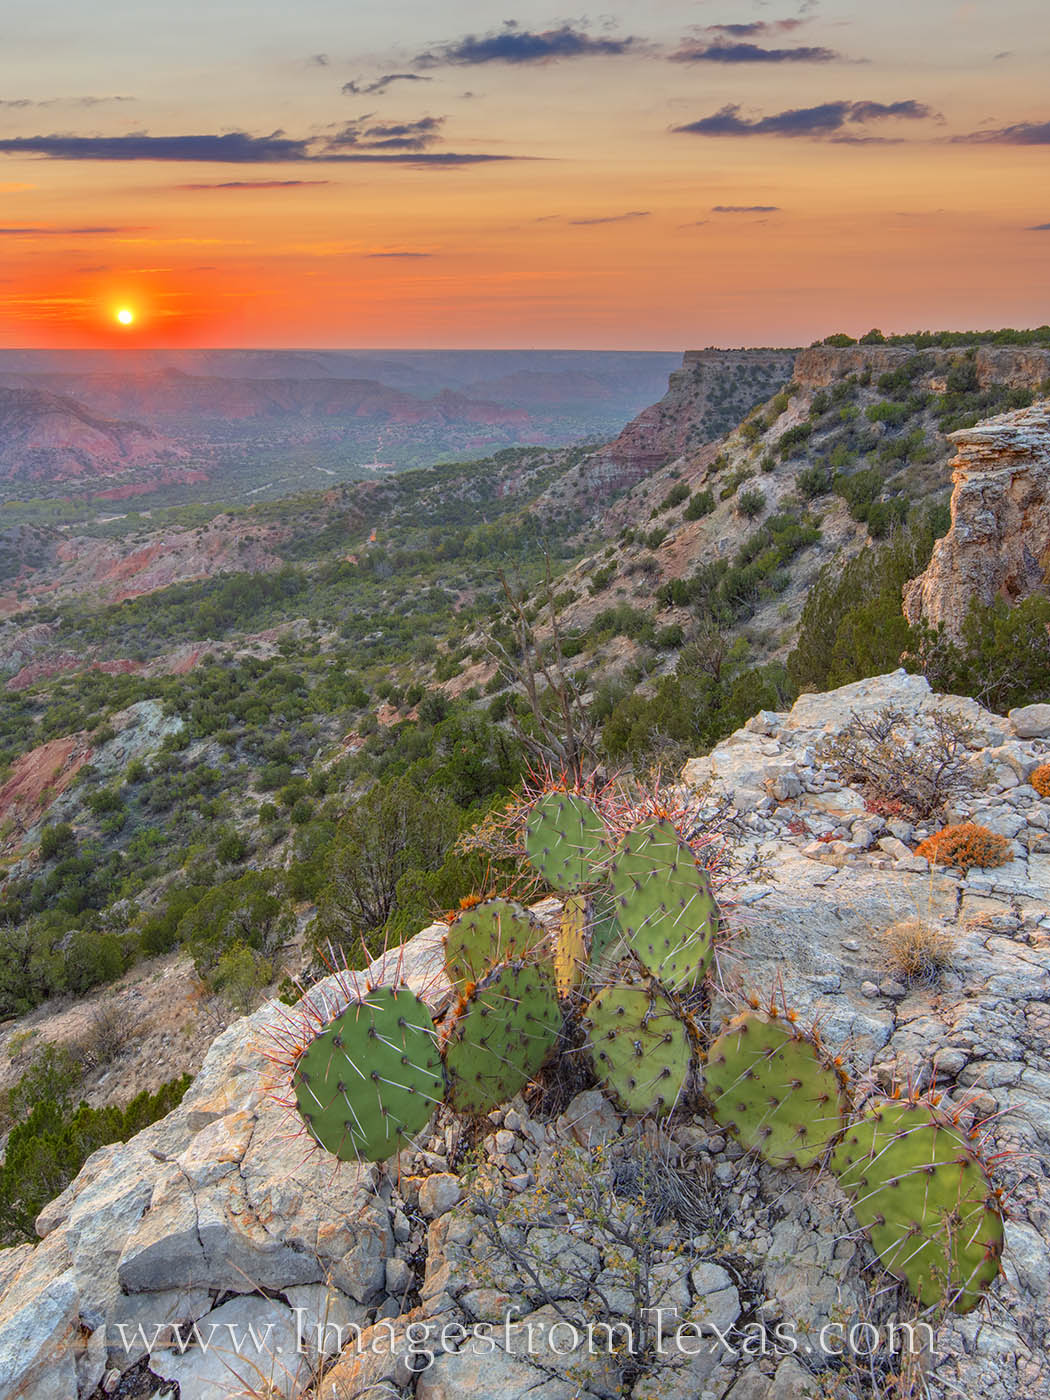 Fortress Cliff in Palo Duro Canyon offers some amazing views for those willing to hike up the trail. This October sunset found...